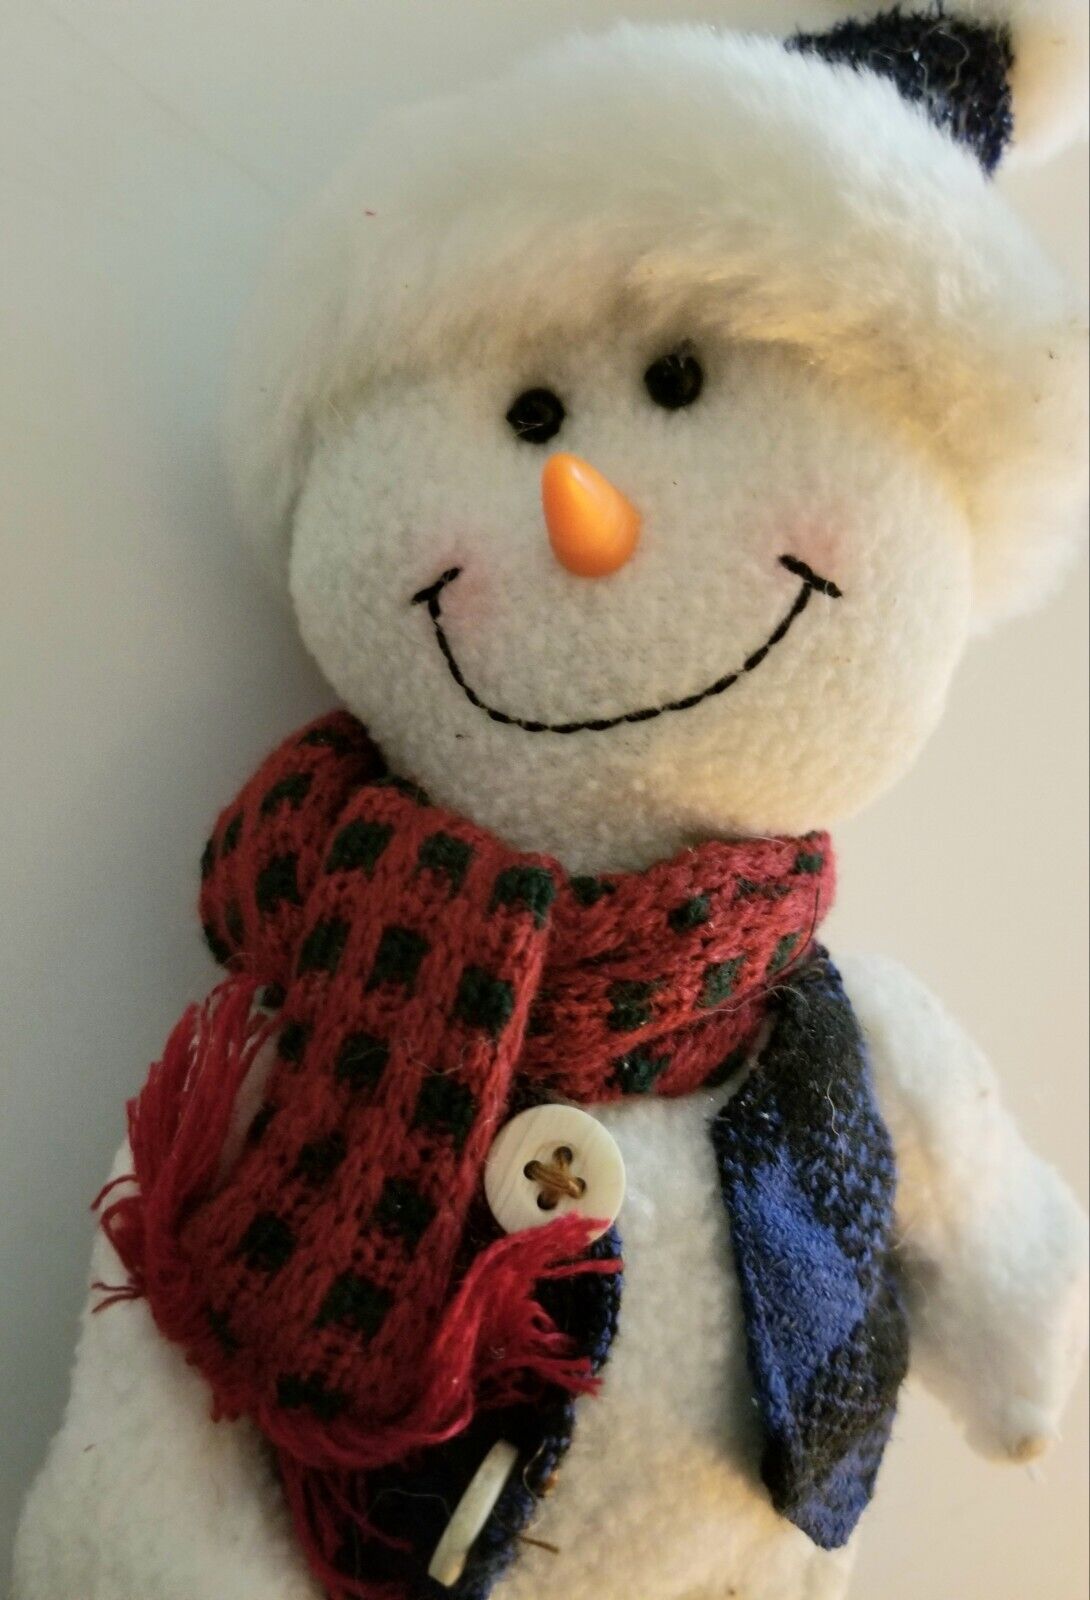 Snowman Santa with Blue Hat.  Fabric with hard plastic inner body